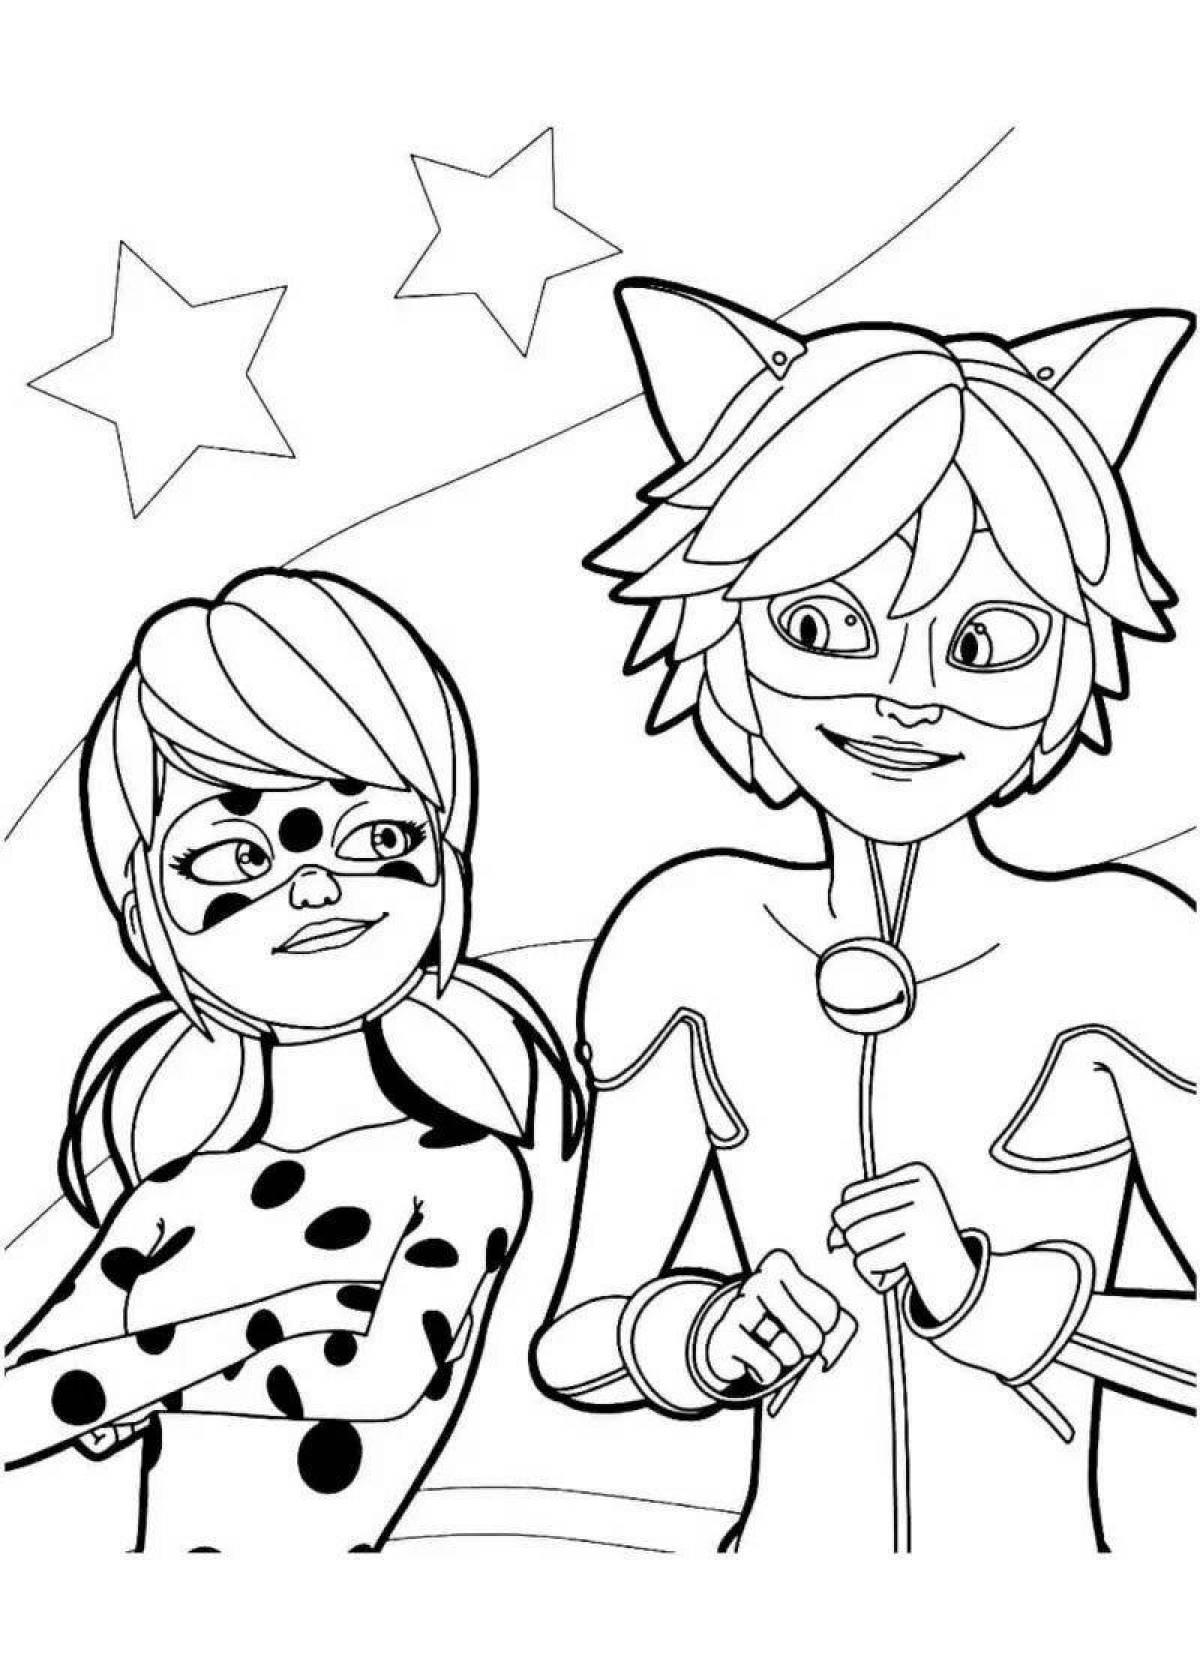 Impressive ladybug and super cat coloring page